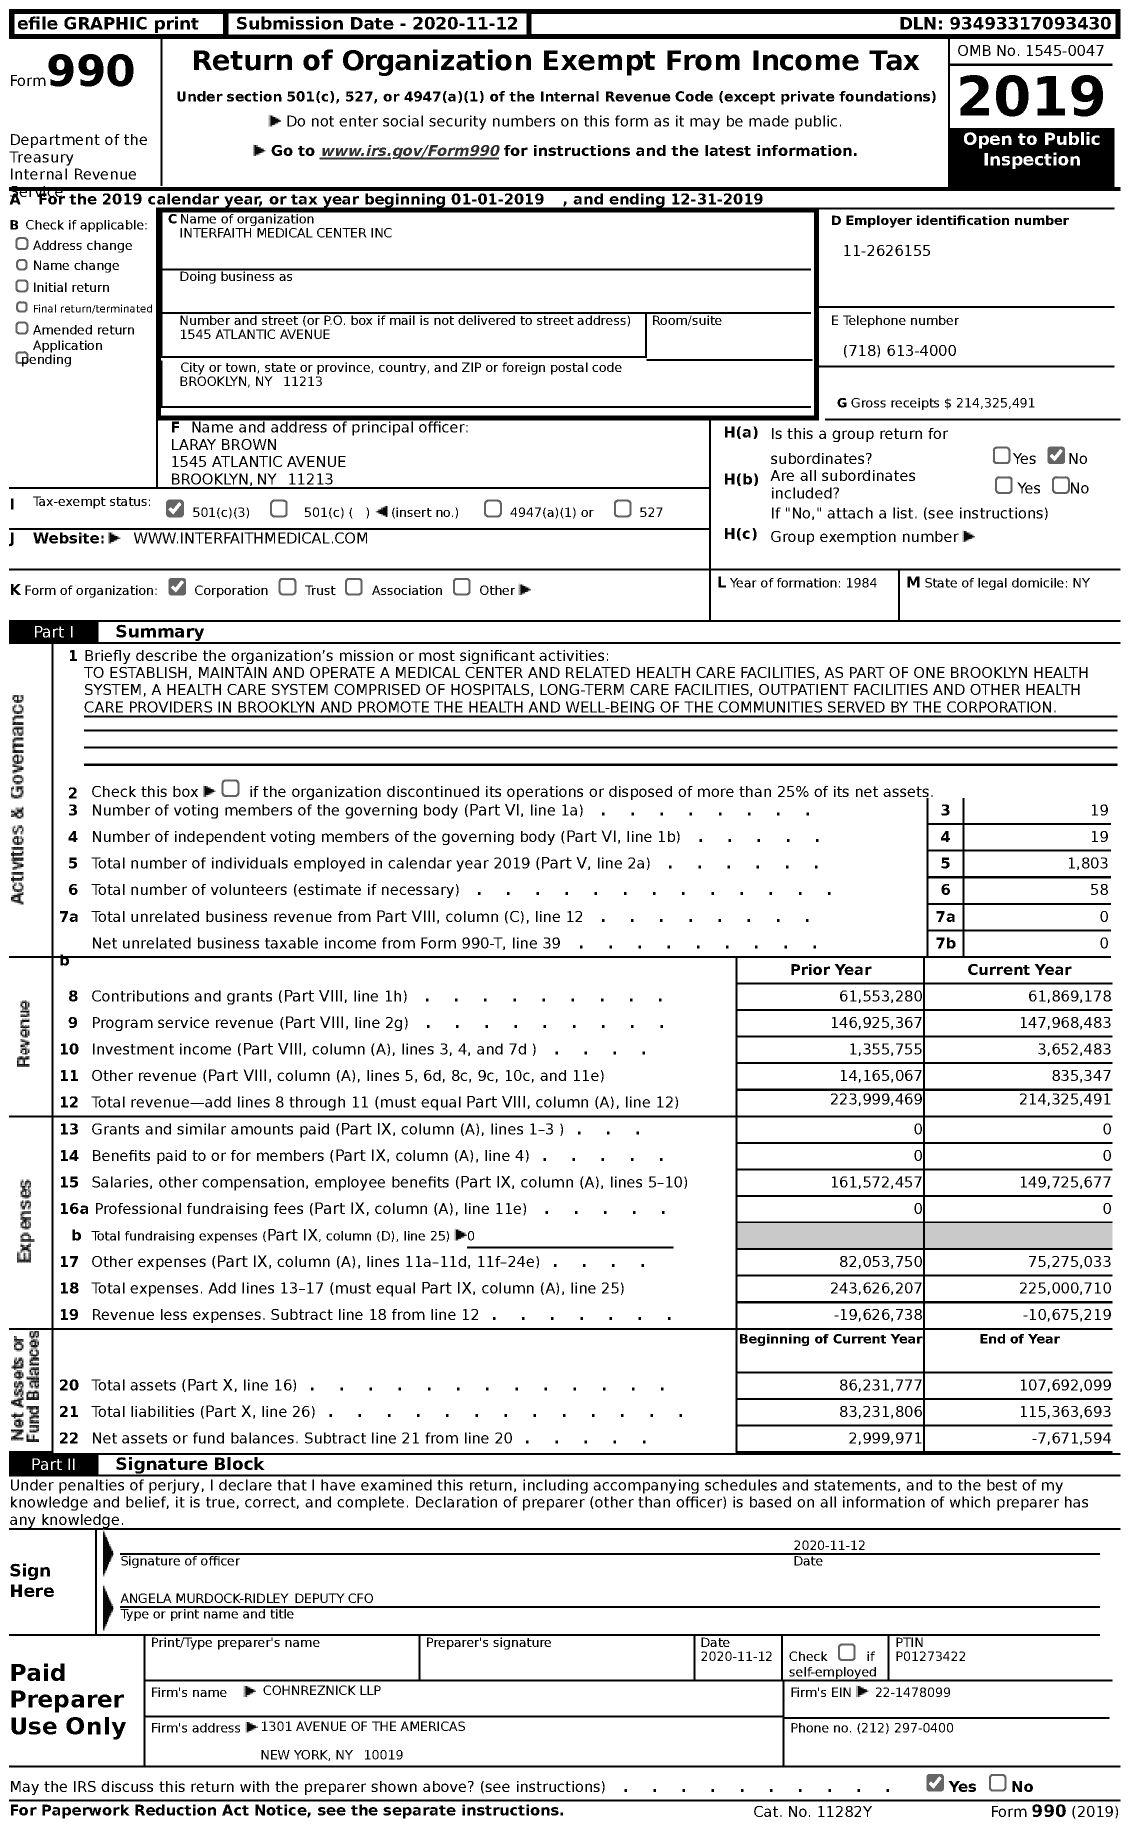 Image of first page of 2019 Form 990 for Interfaith Medical Center (IMC)